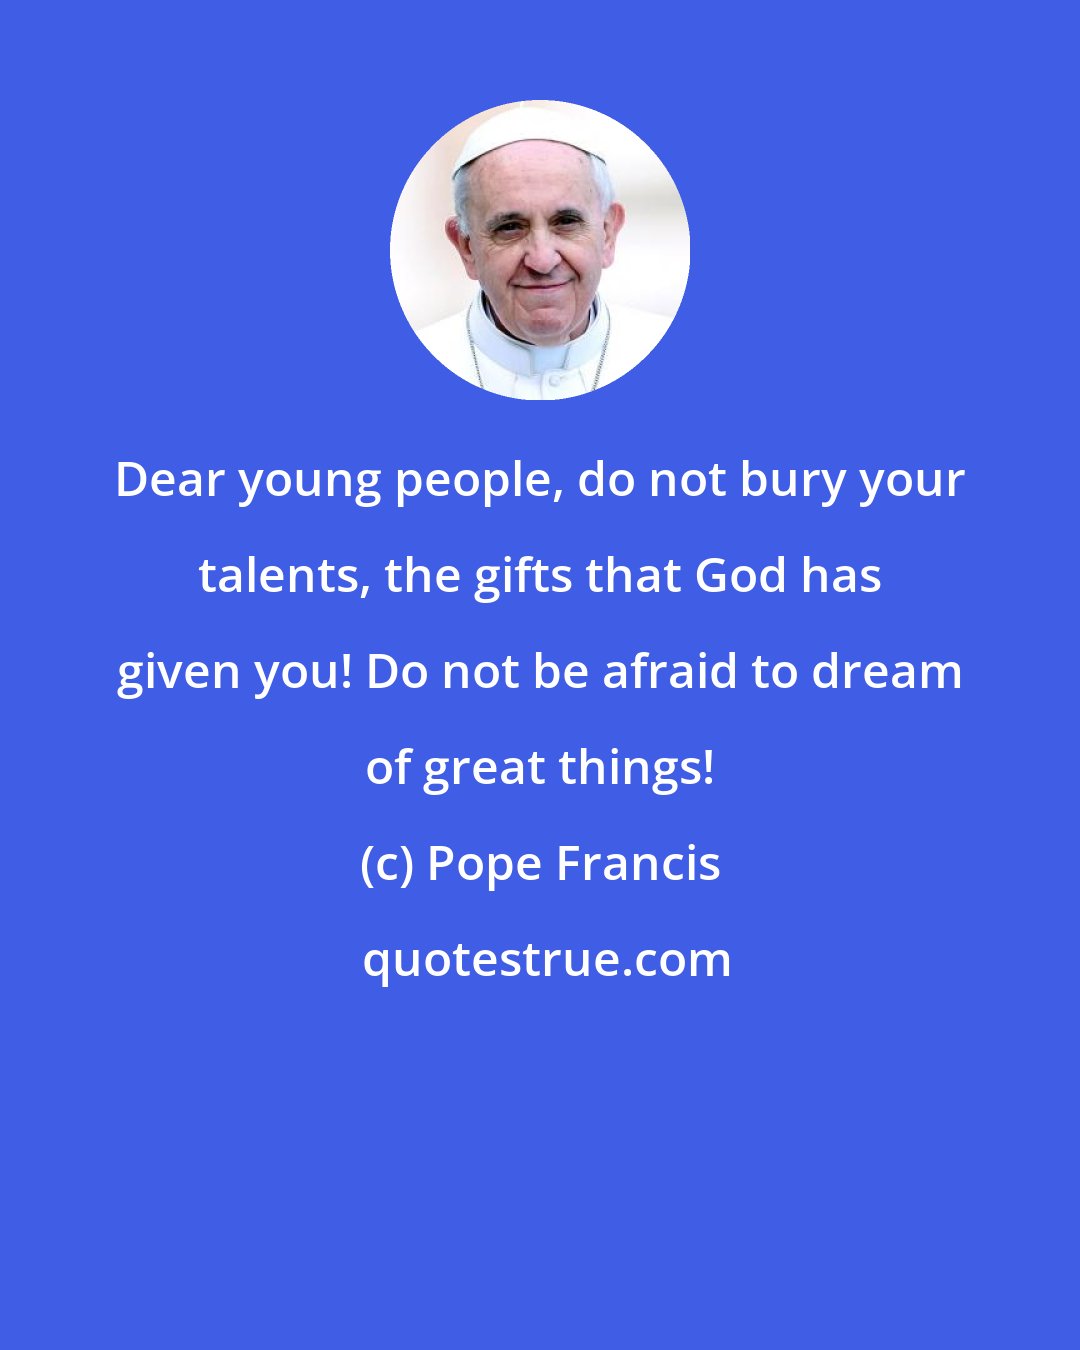 Pope Francis: Dear young people, do not bury your talents, the gifts that God has given you! Do not be afraid to dream of great things!